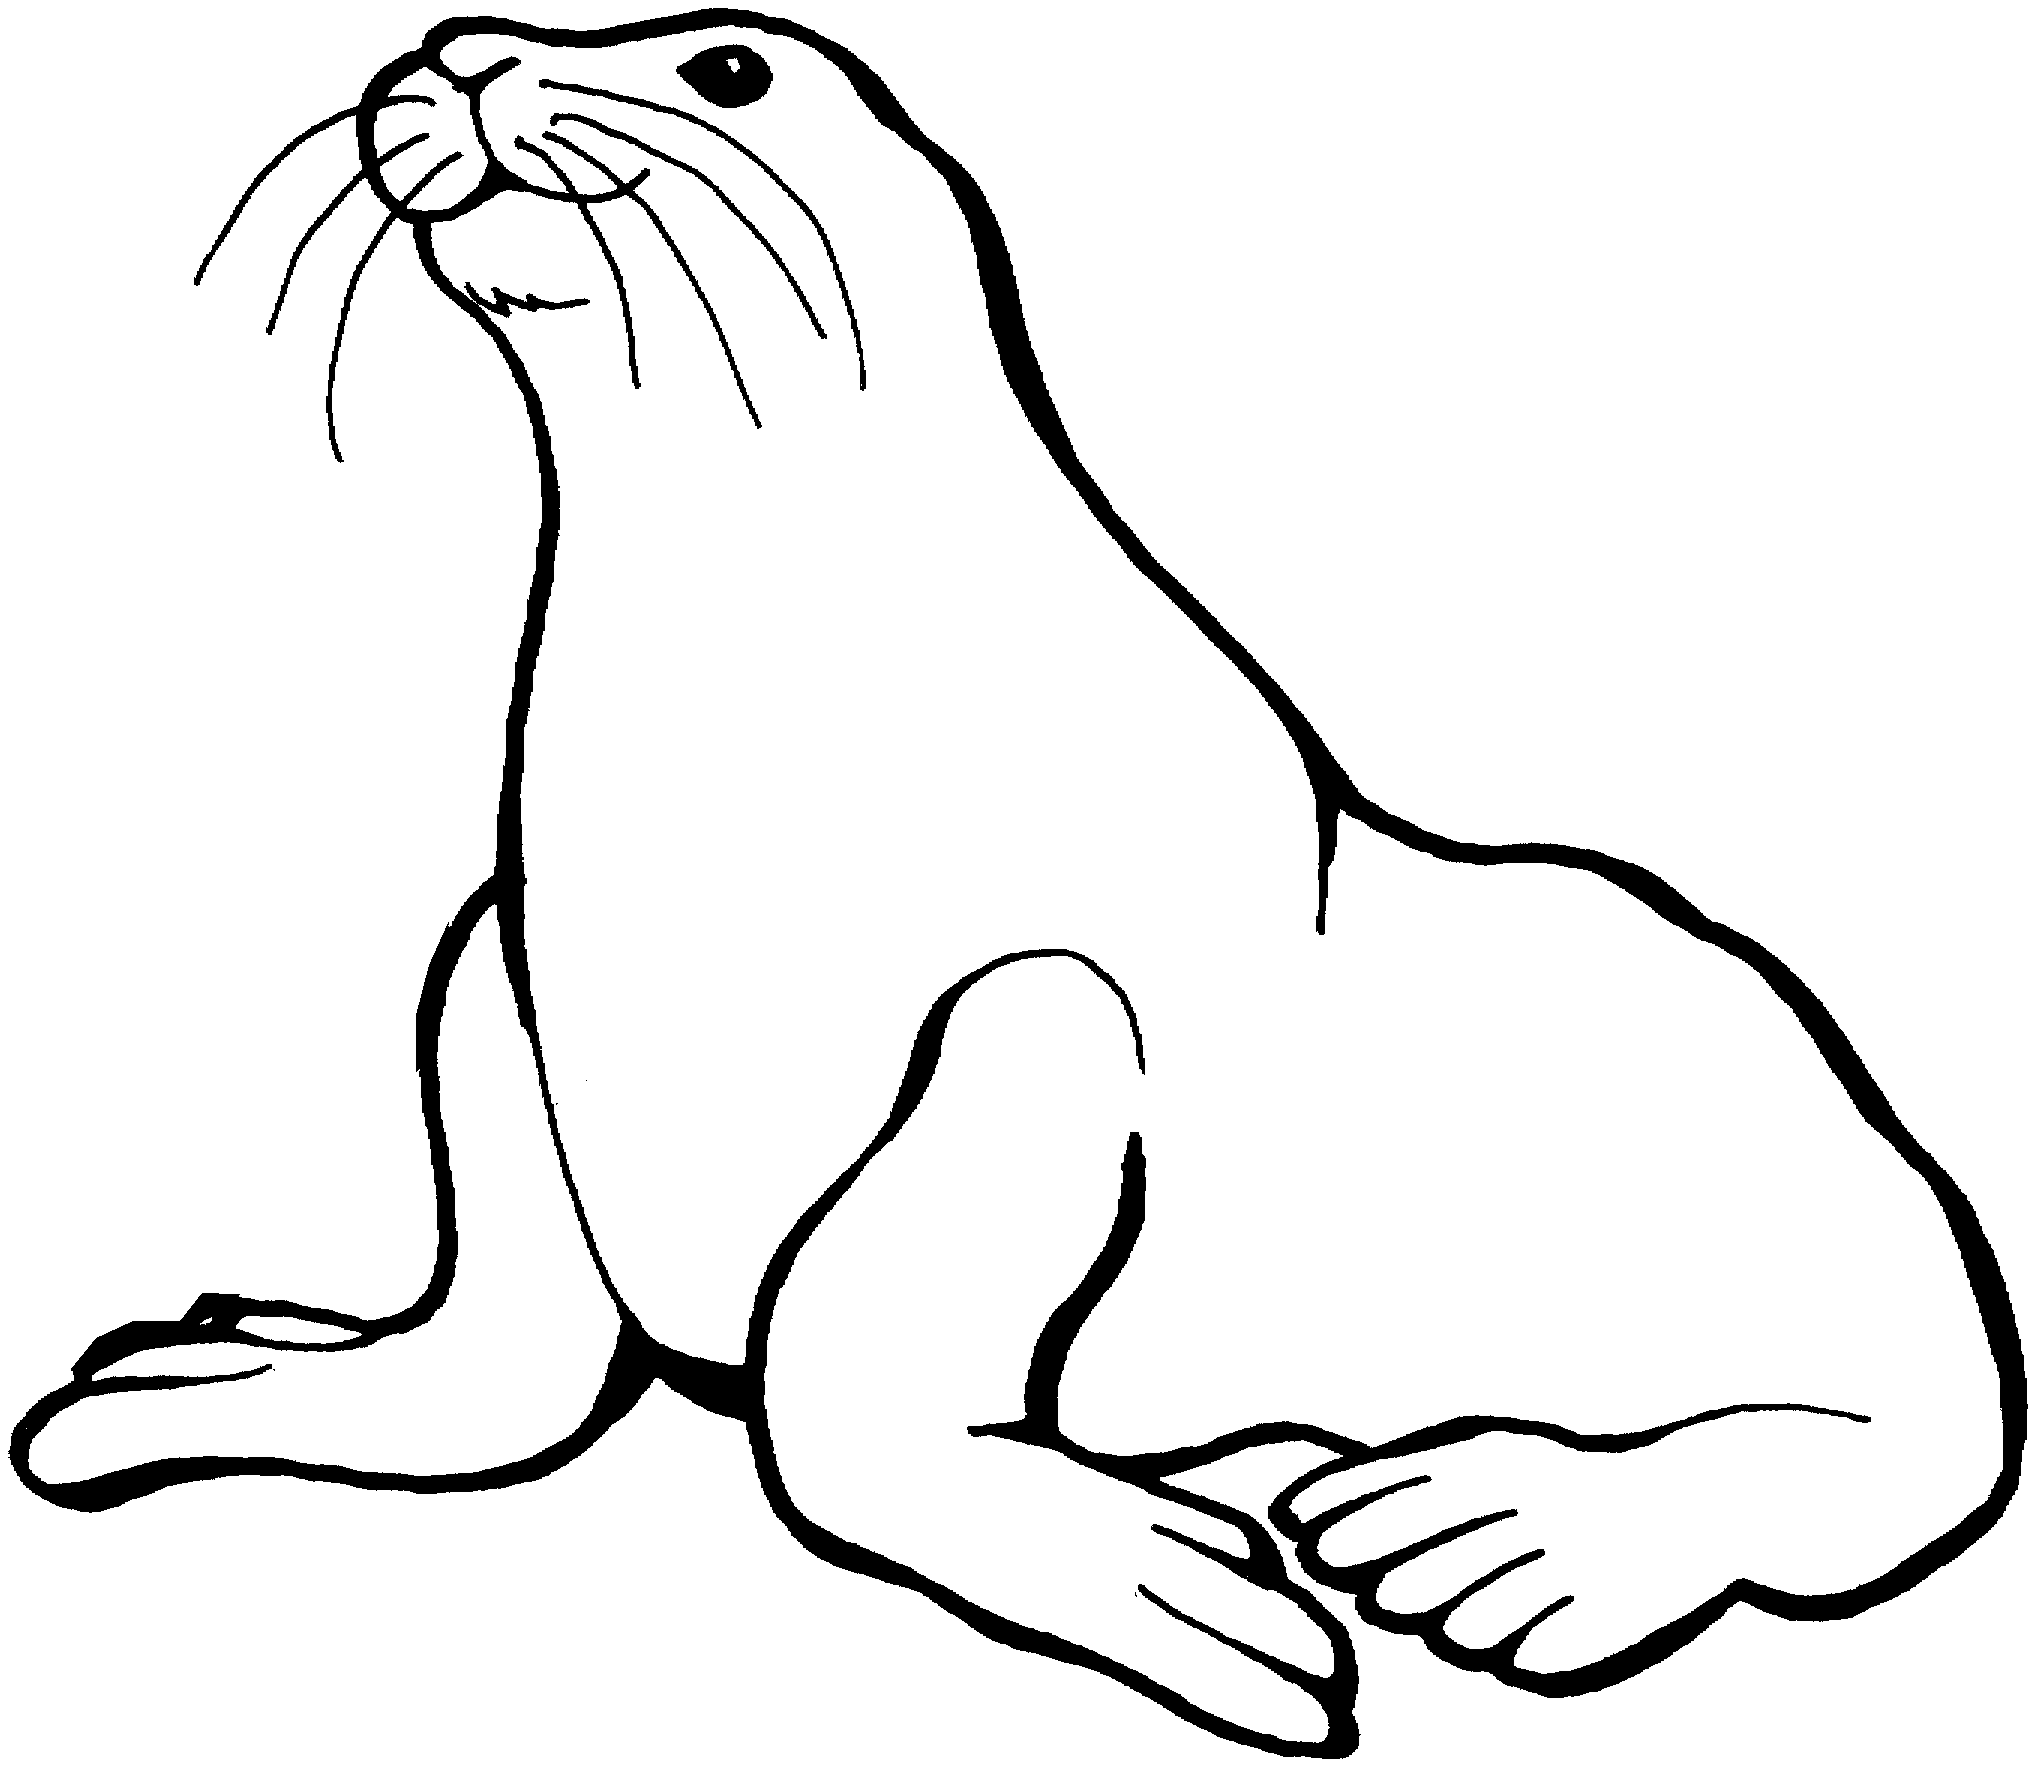 Seal Clip Art Black And White | Clipart Panda - Free Clipart Images